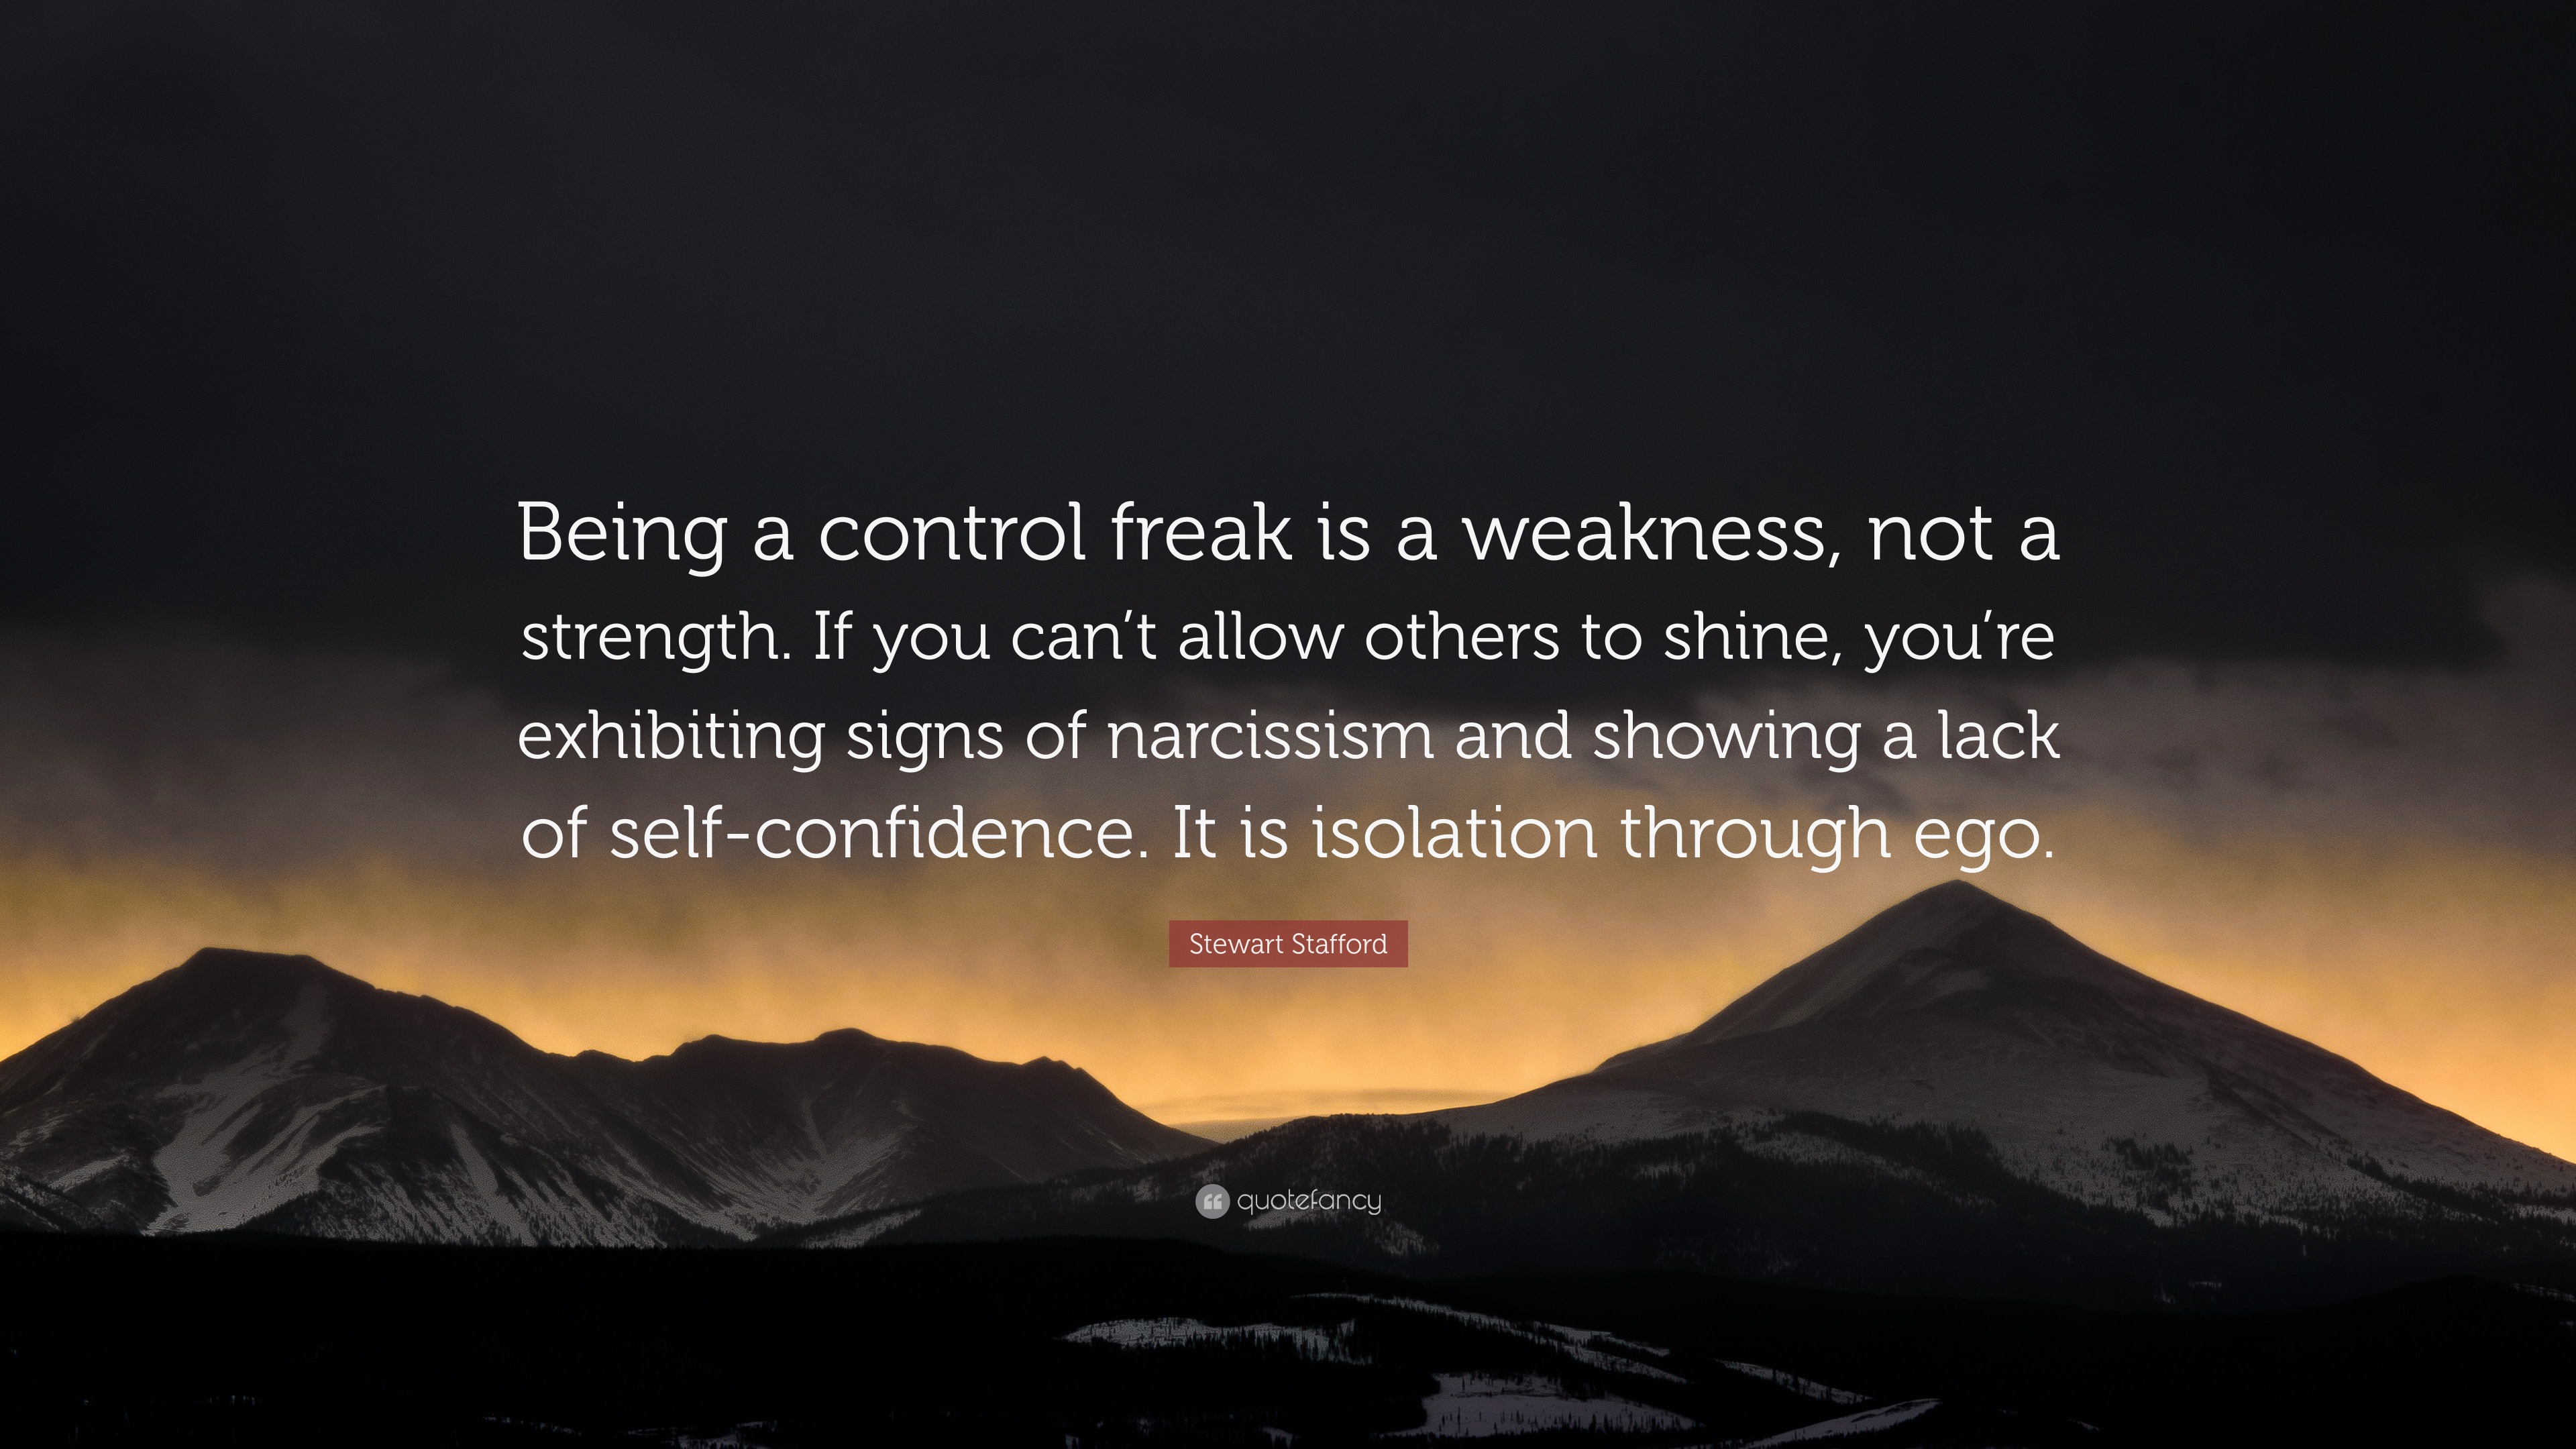 Stewart Stafford Quote: “Being a control freak is a weakness, not a  strength. If you can't allow others to shine, you're exhibiting signs of  narc”